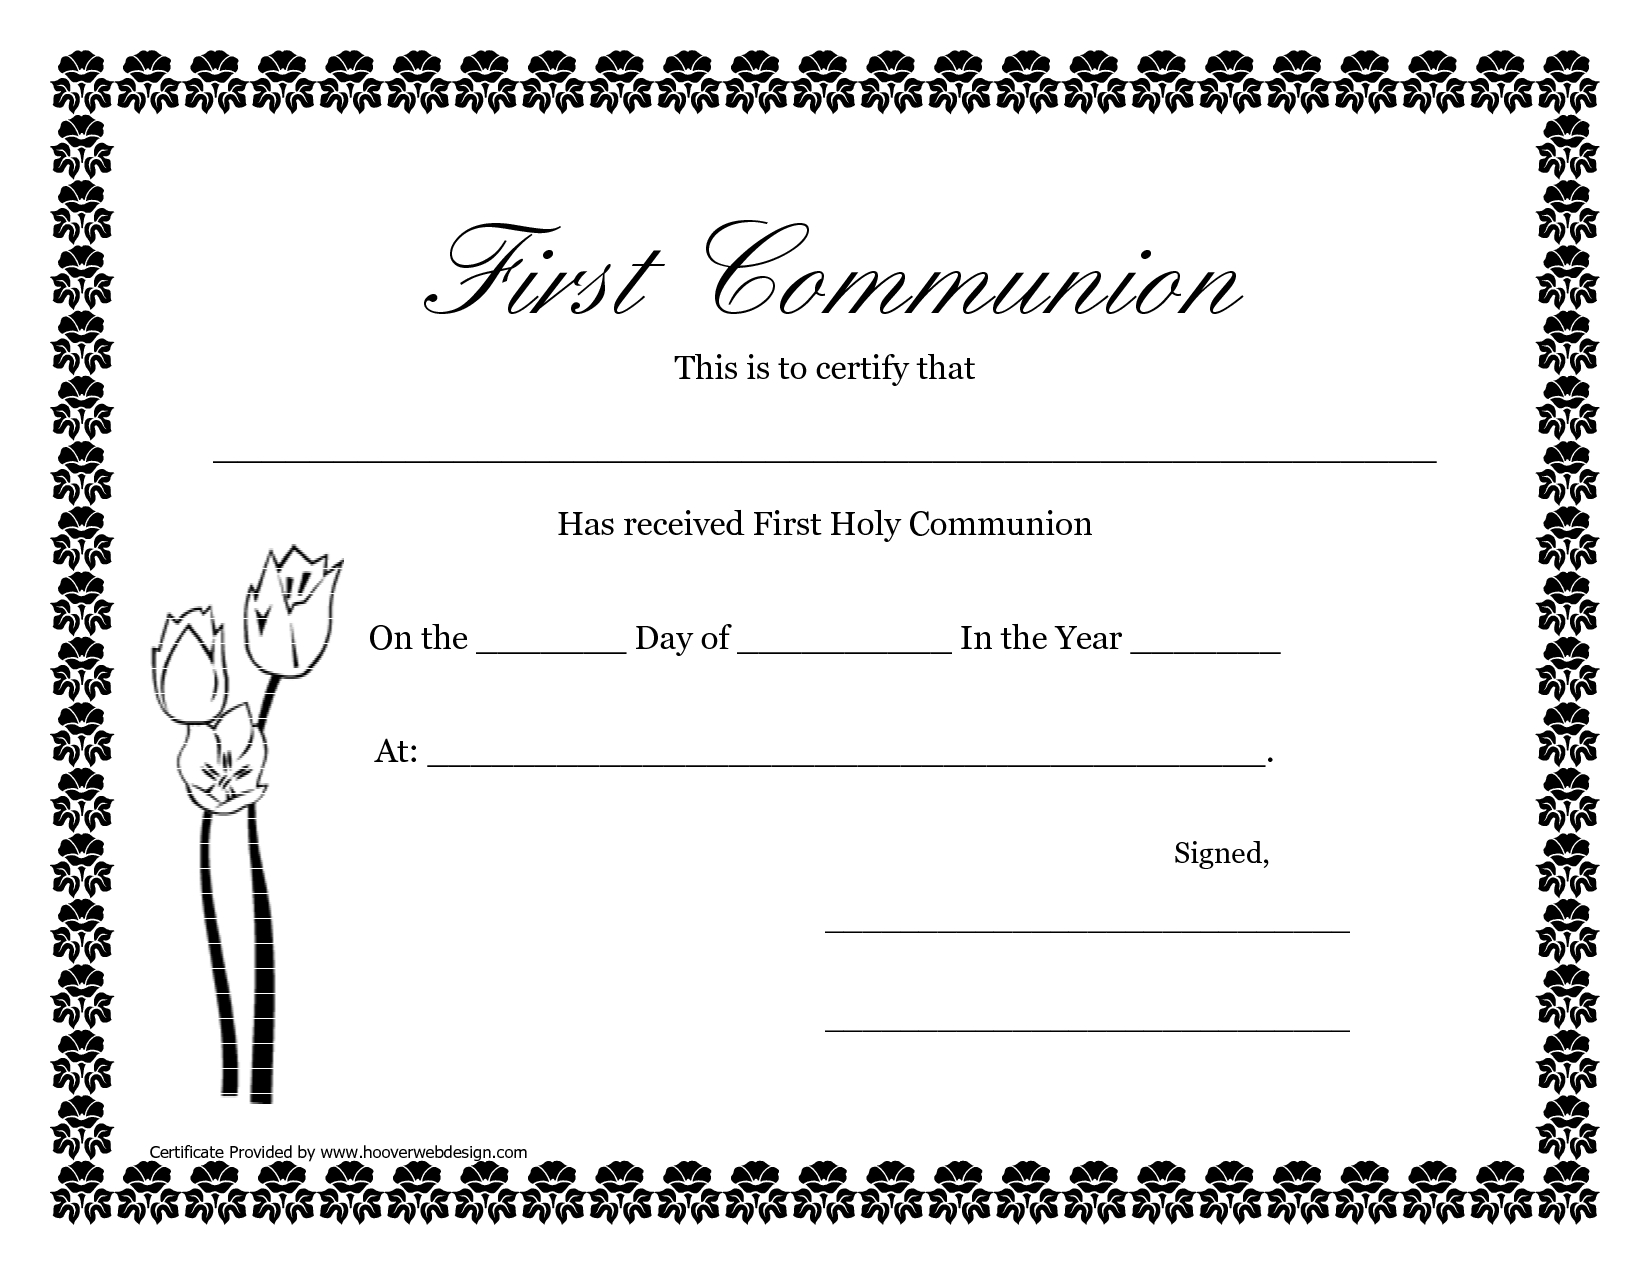 First Communion Banner Templates | Printable First Communion - First Holy Communion Cards Printable Free